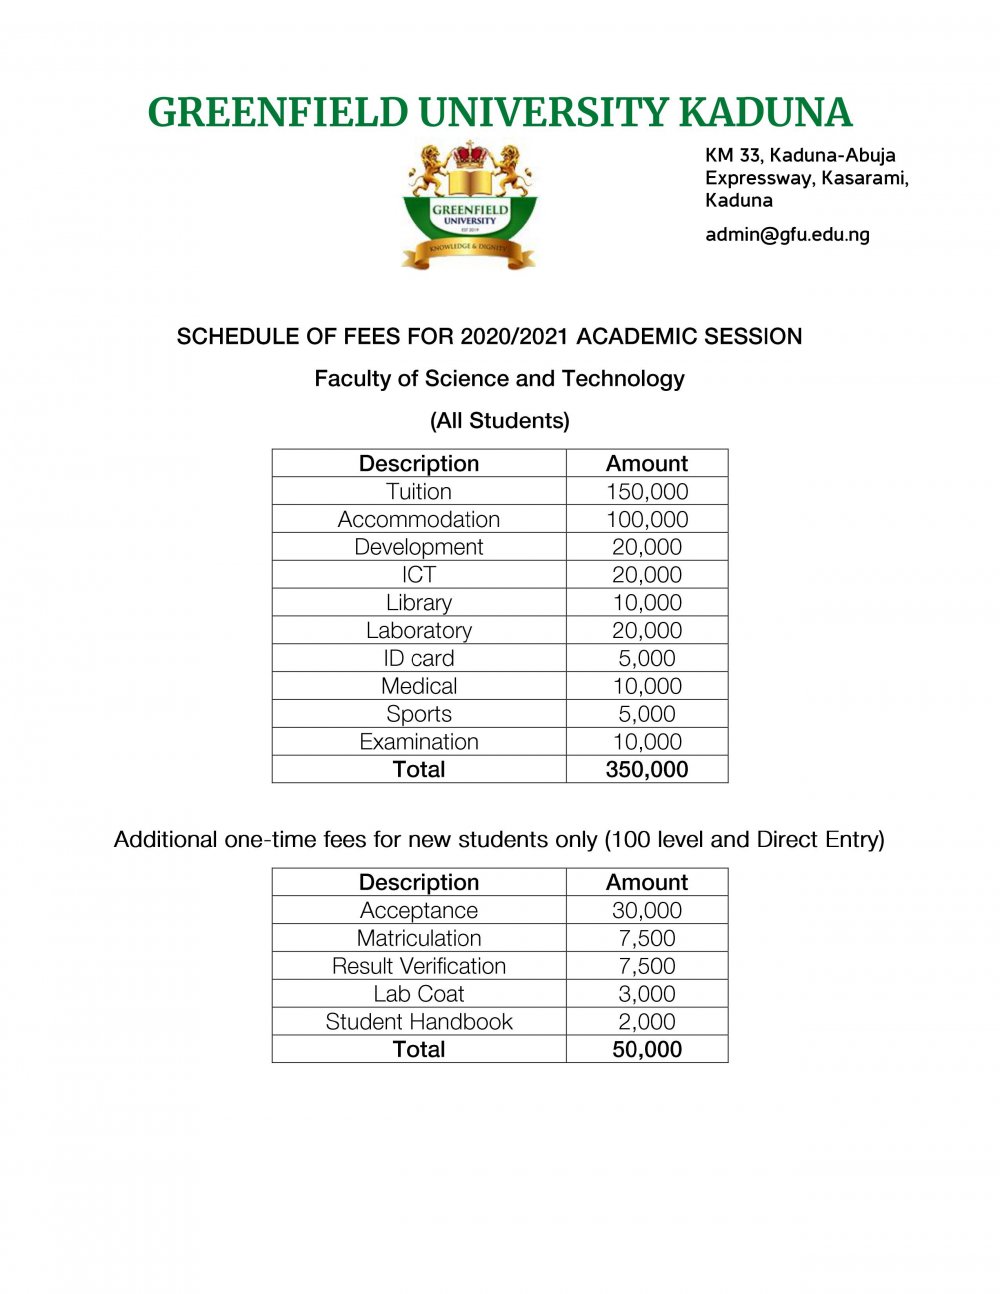 Greenfield University fees for 2020/2021 Academic Session